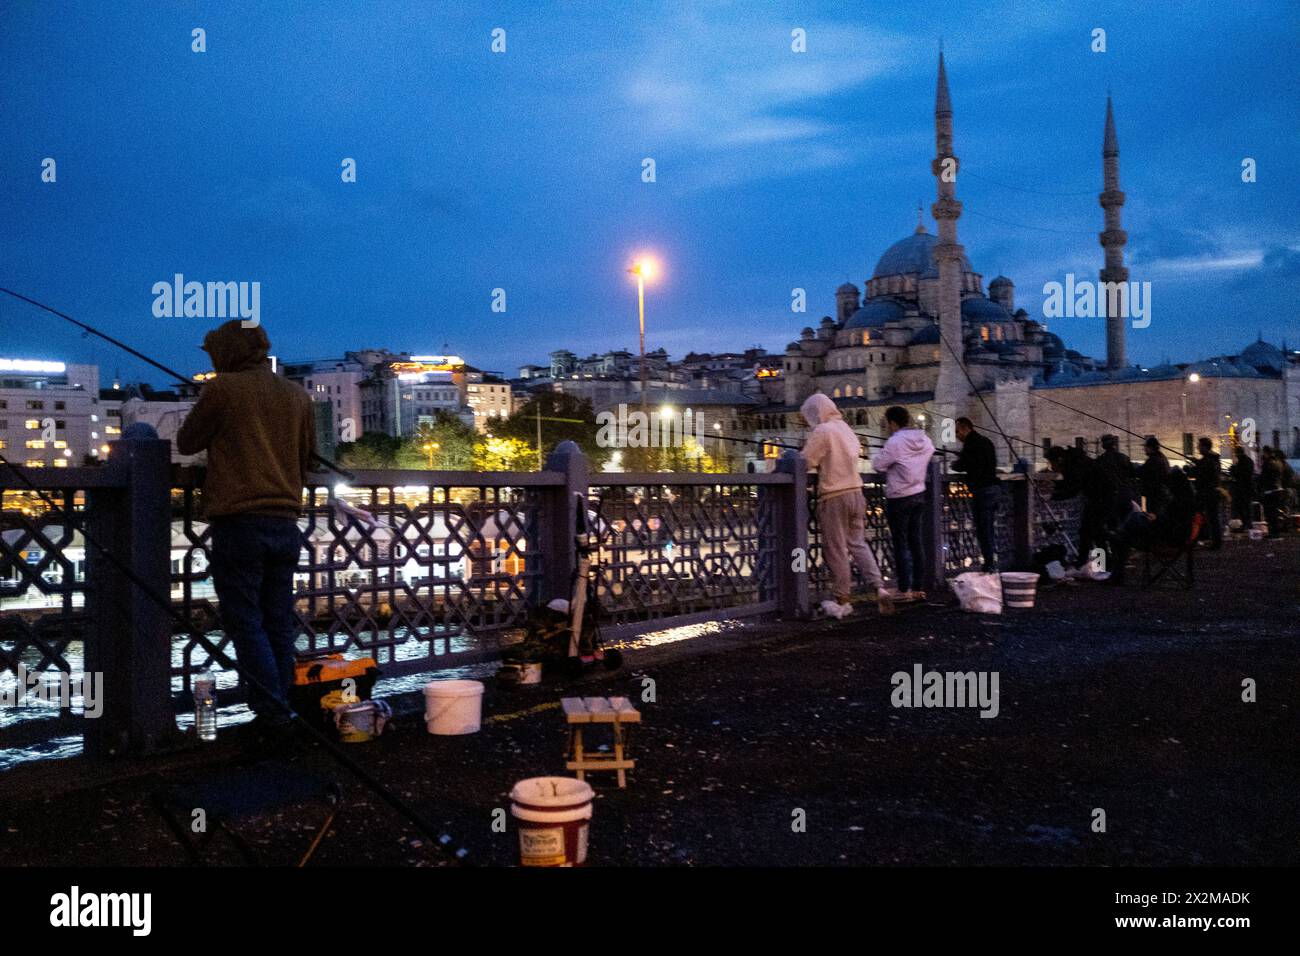 Fishermen on the Galata Bridge on the estuary of the Golden Horn at dusk, linking the districts of Sultanahmet and Galata, with the New Mosque (Yeni C Stock Photo